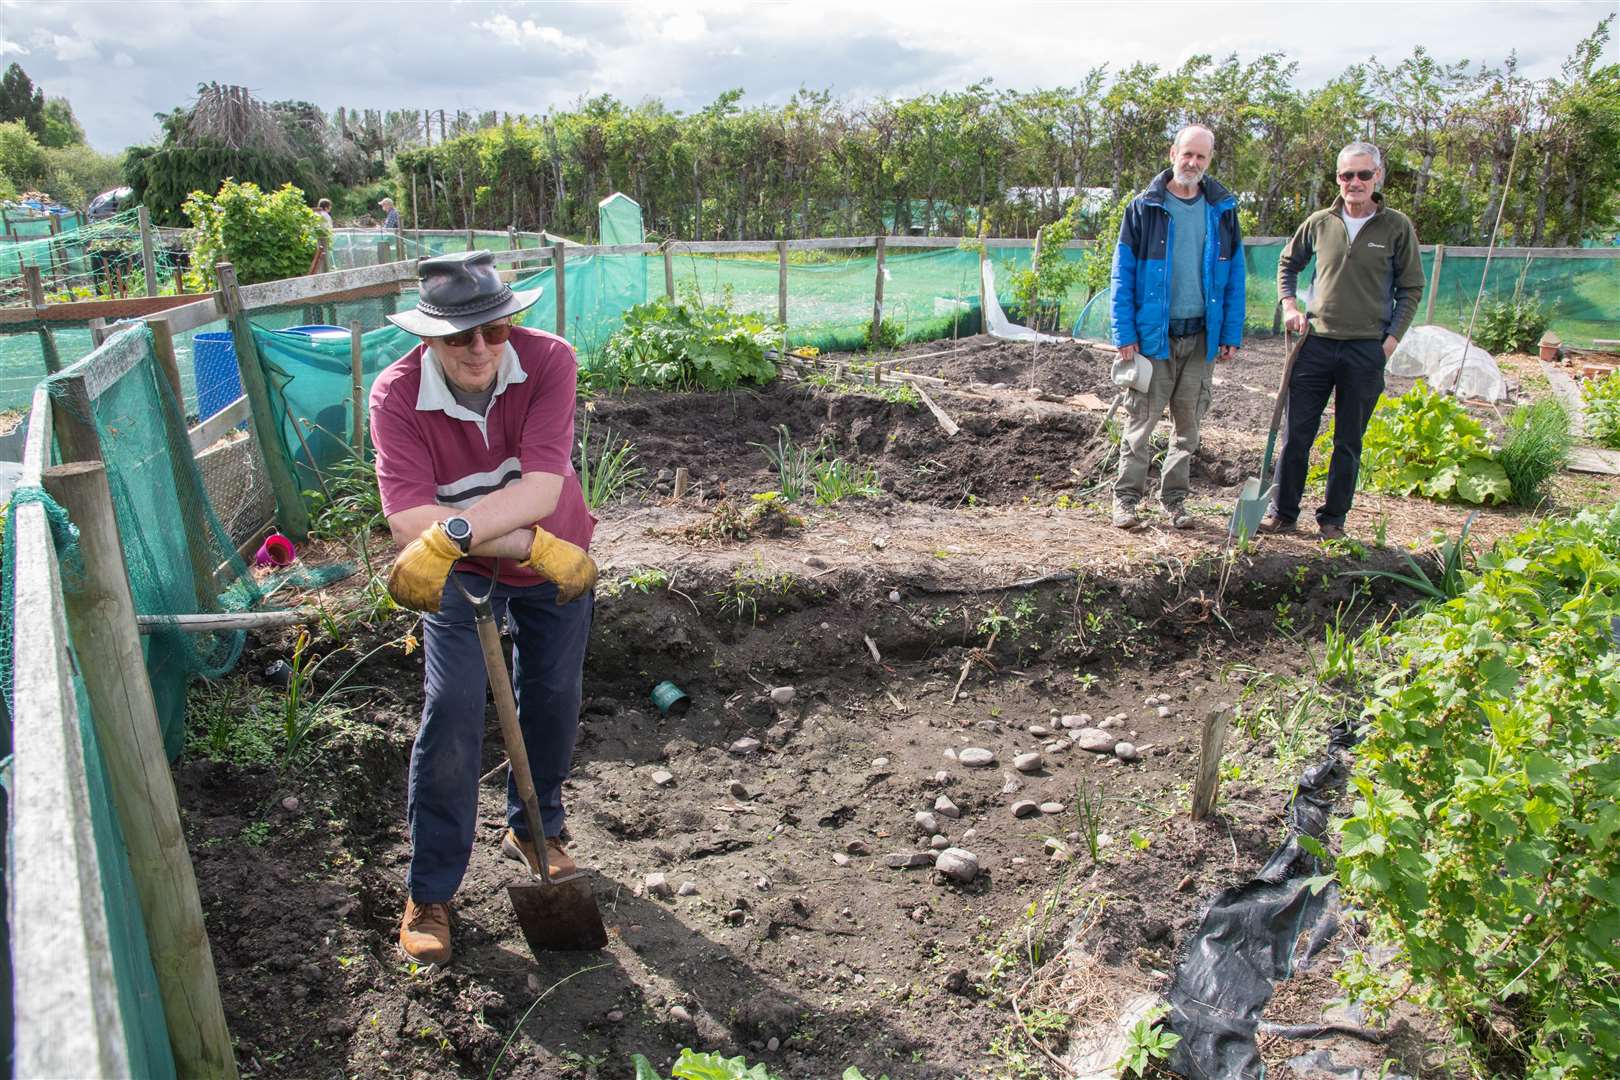 Members of Transition Town Forres working in the community garden.